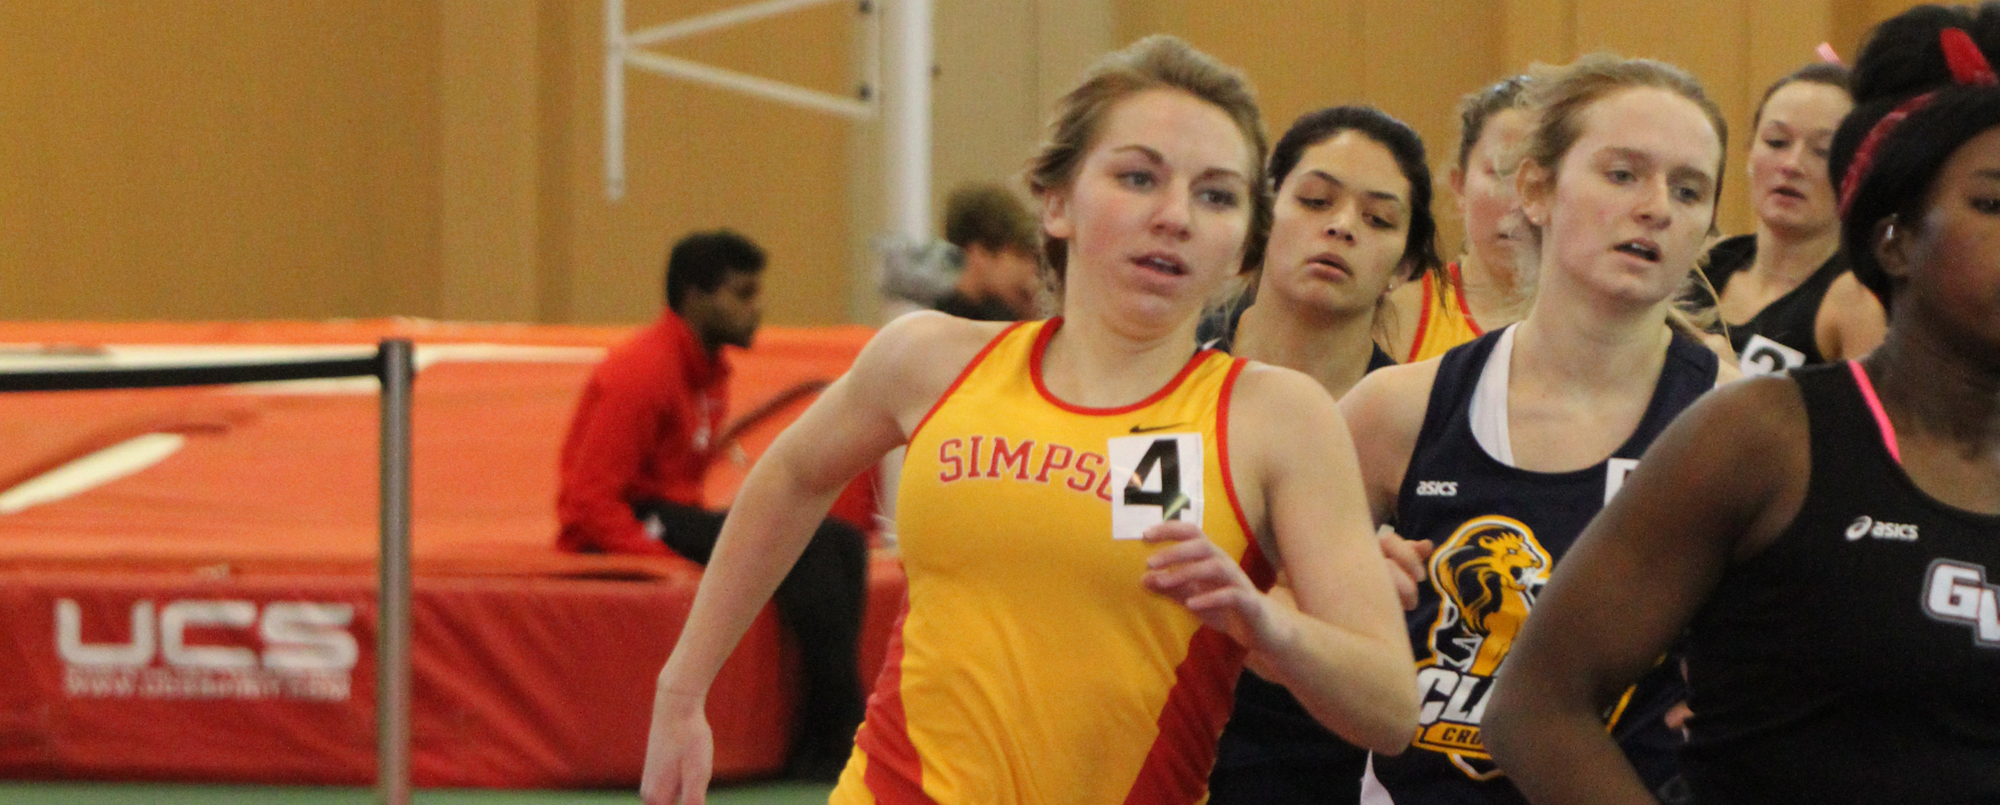 Courtney Neuendorf ran to a sixth-place finish in the 3,000-meter run at the Nebraska Wesleyan Invitational on Friday, Jan. 20.